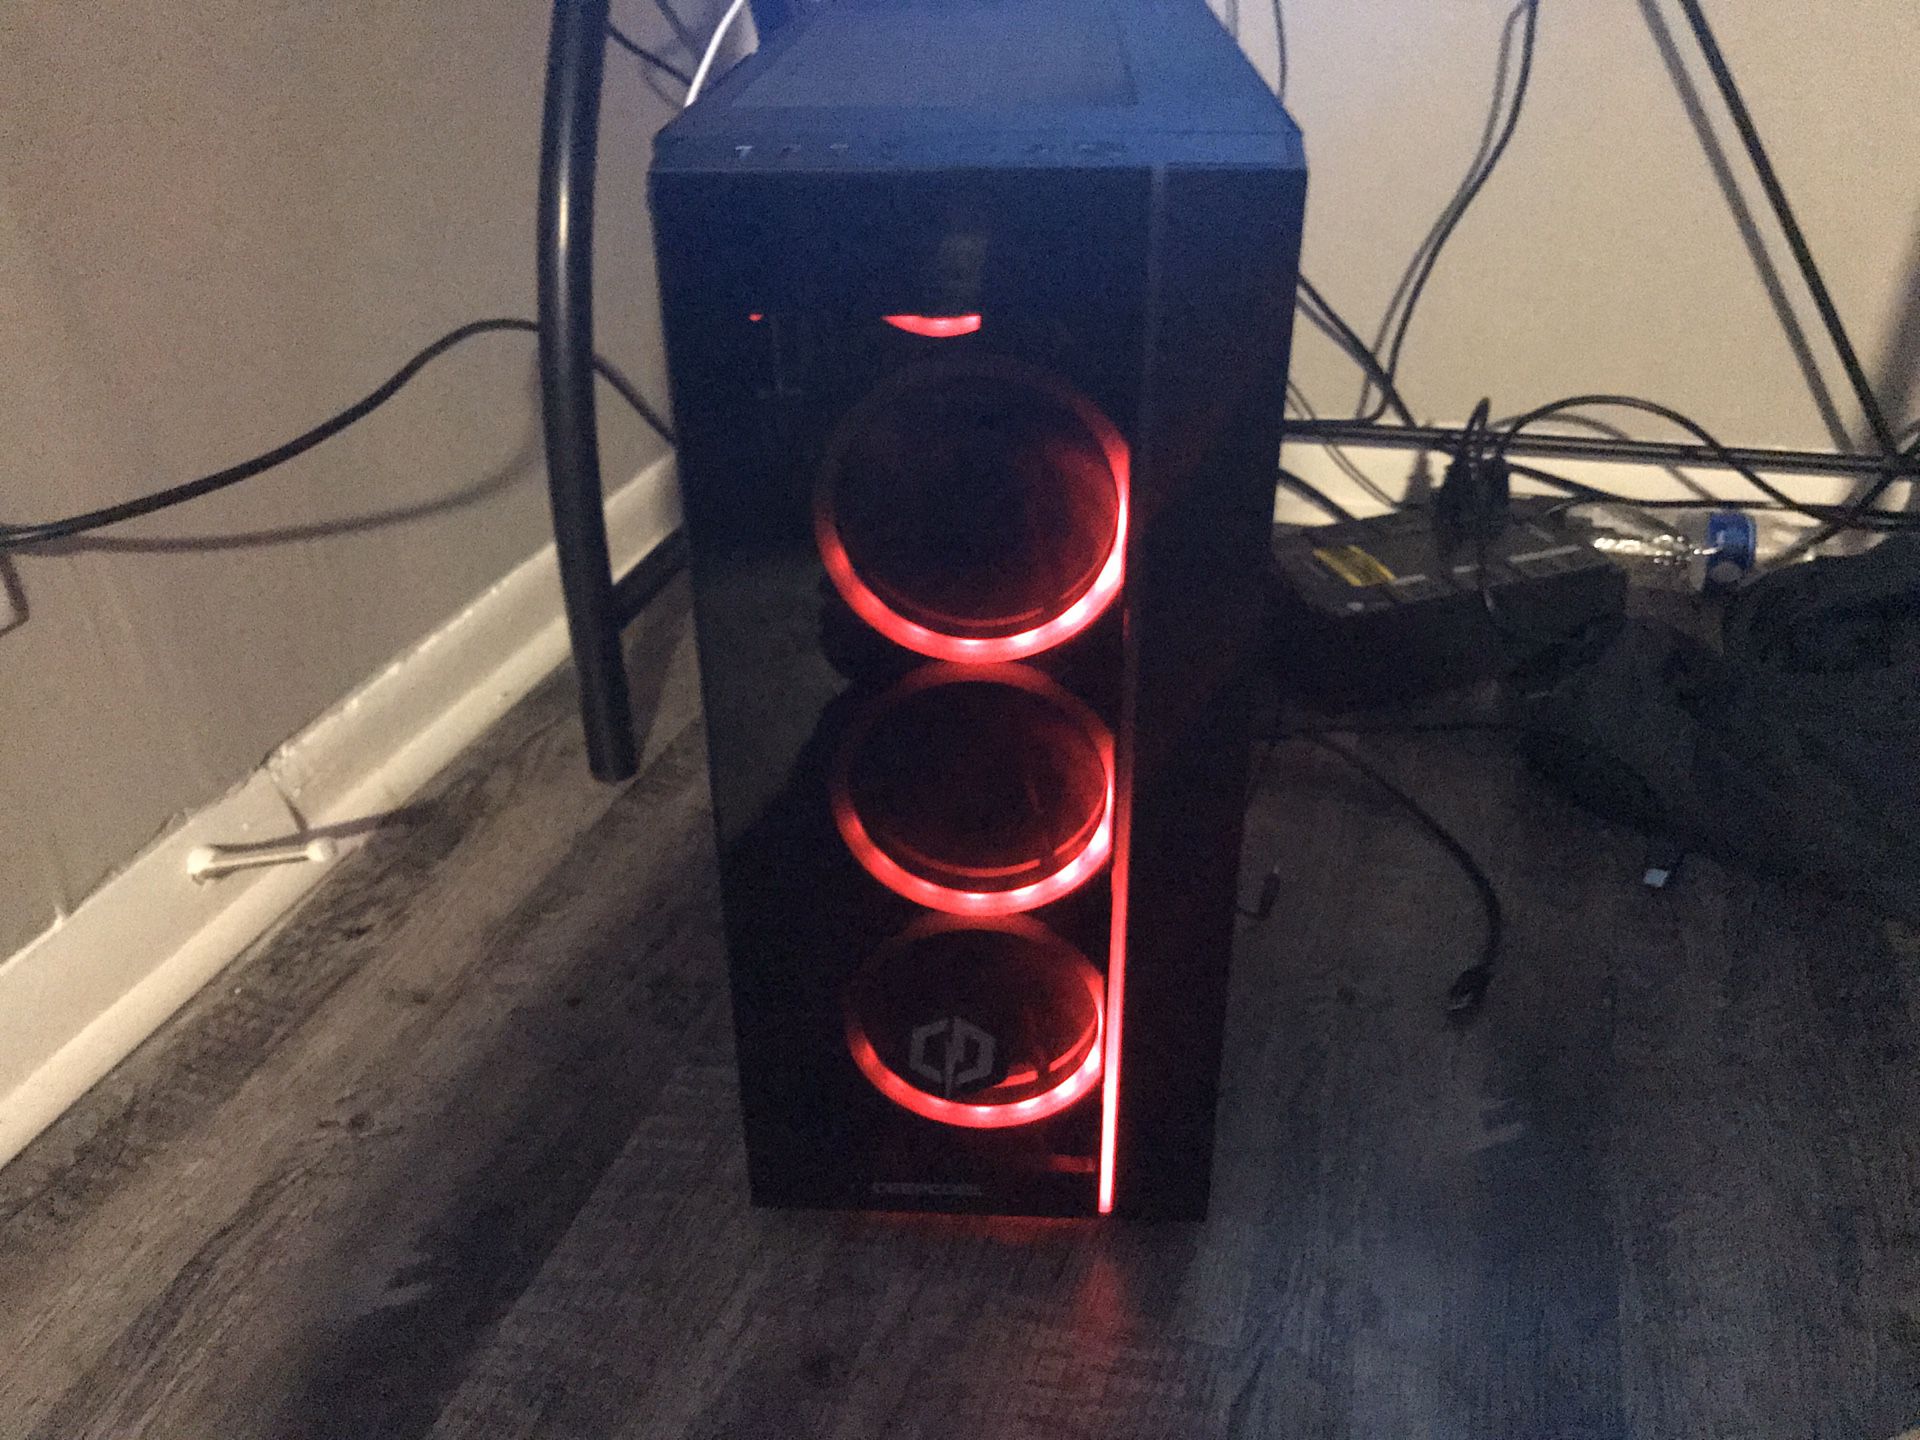 CyberPower Gaming Computer